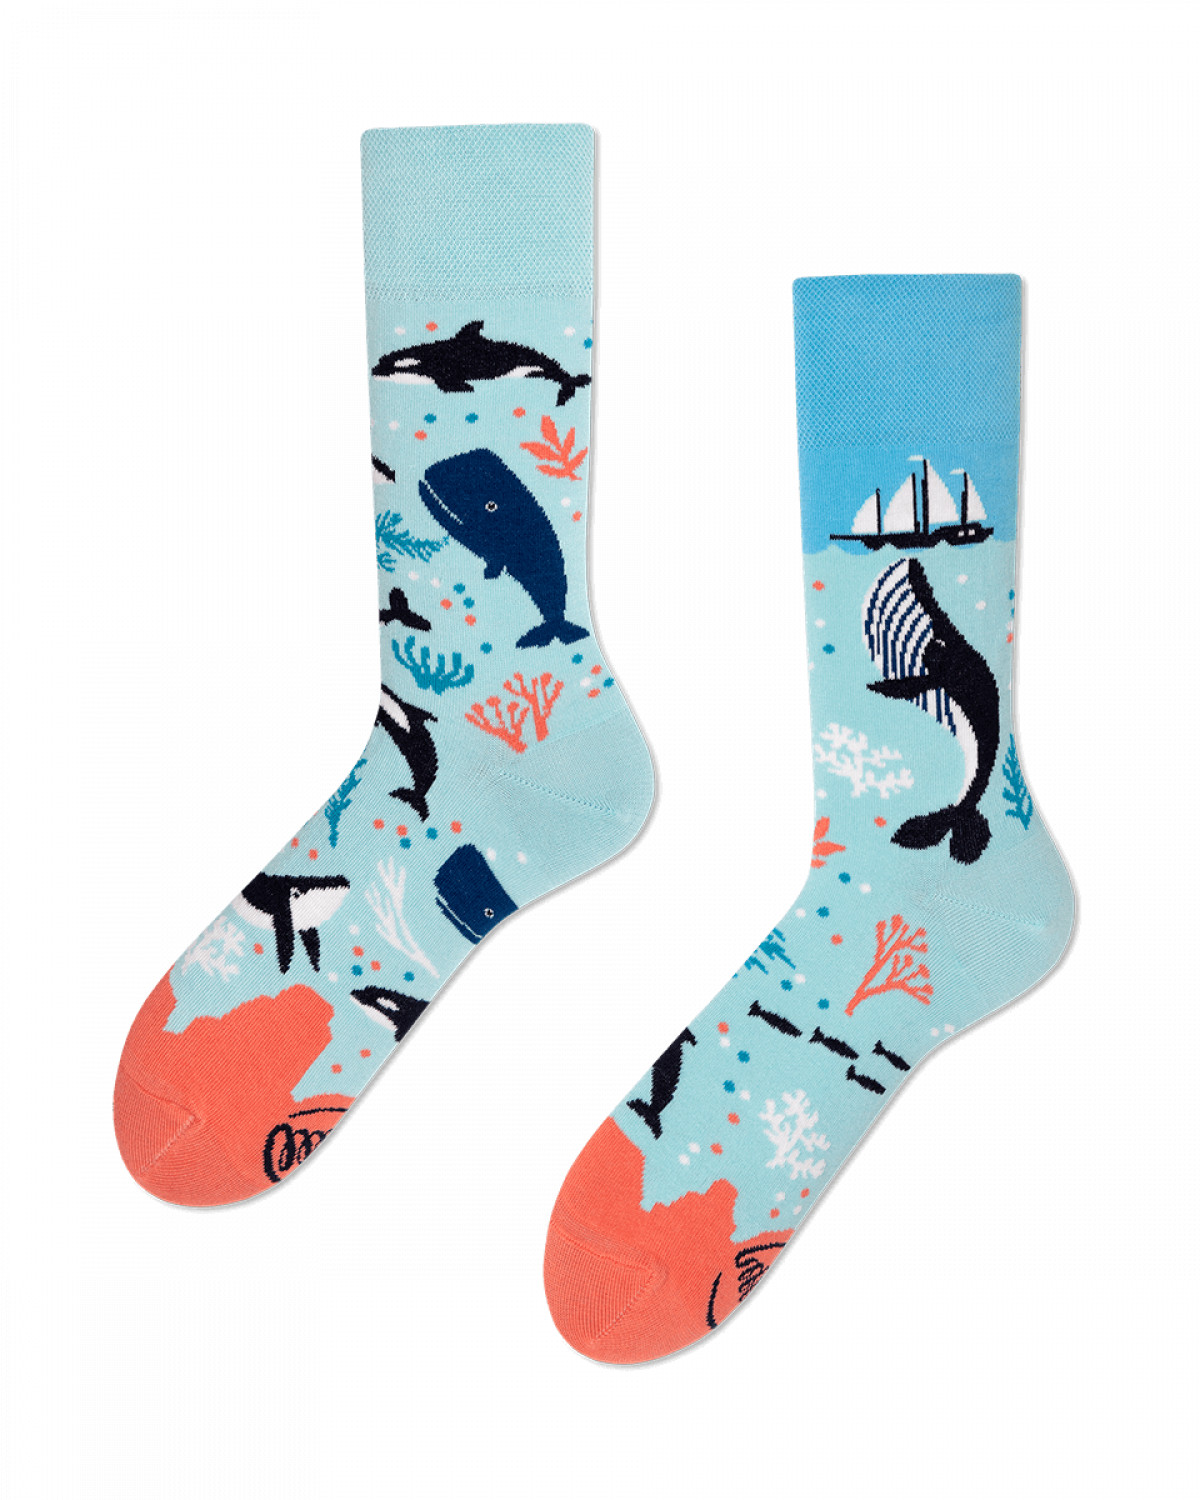 Chaussettes Many morning - Ocean life - Boutique Toup'tibou - photo 6